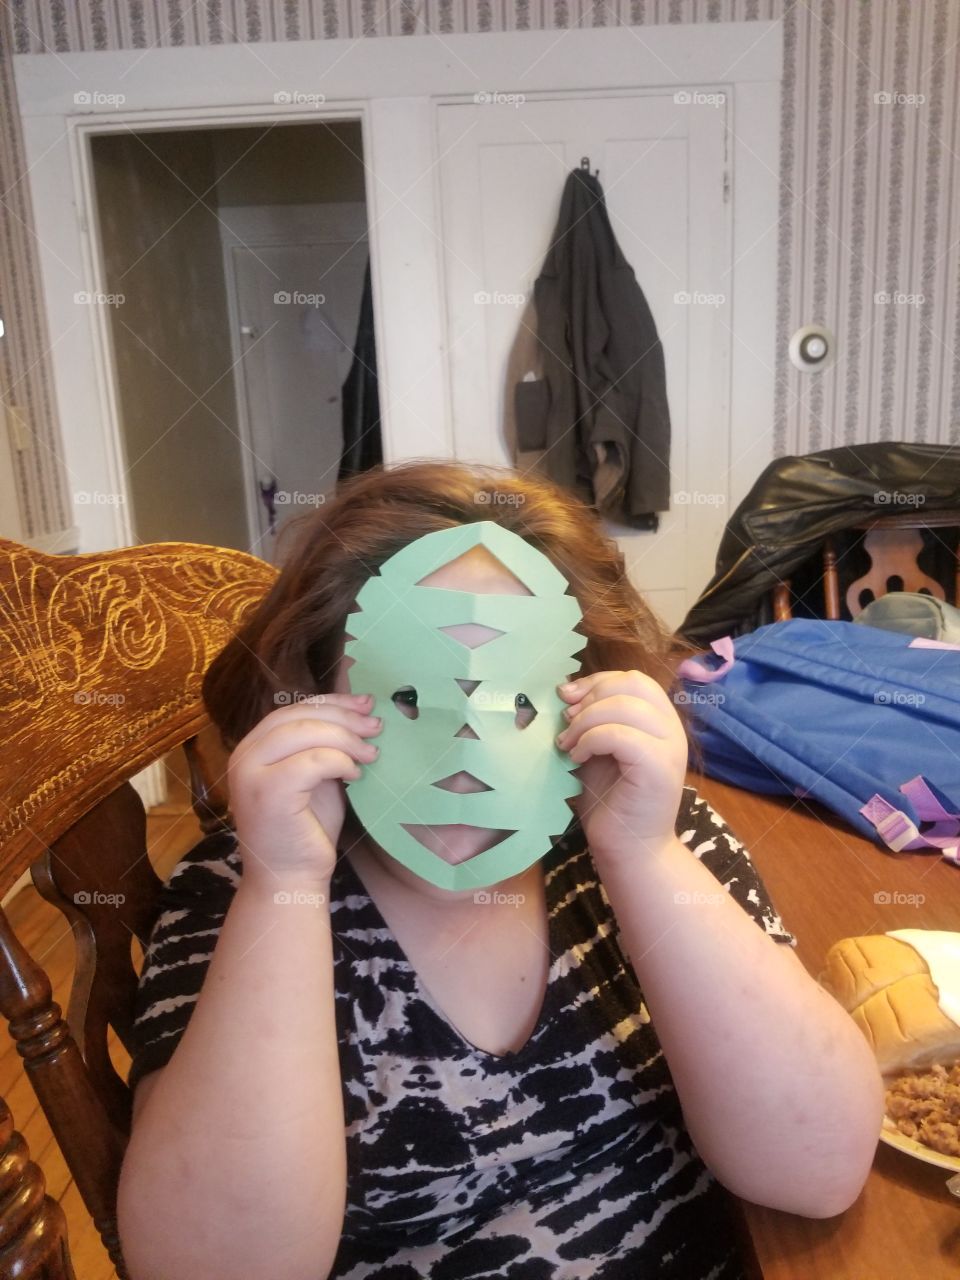 A girl crafting and artsy mask.